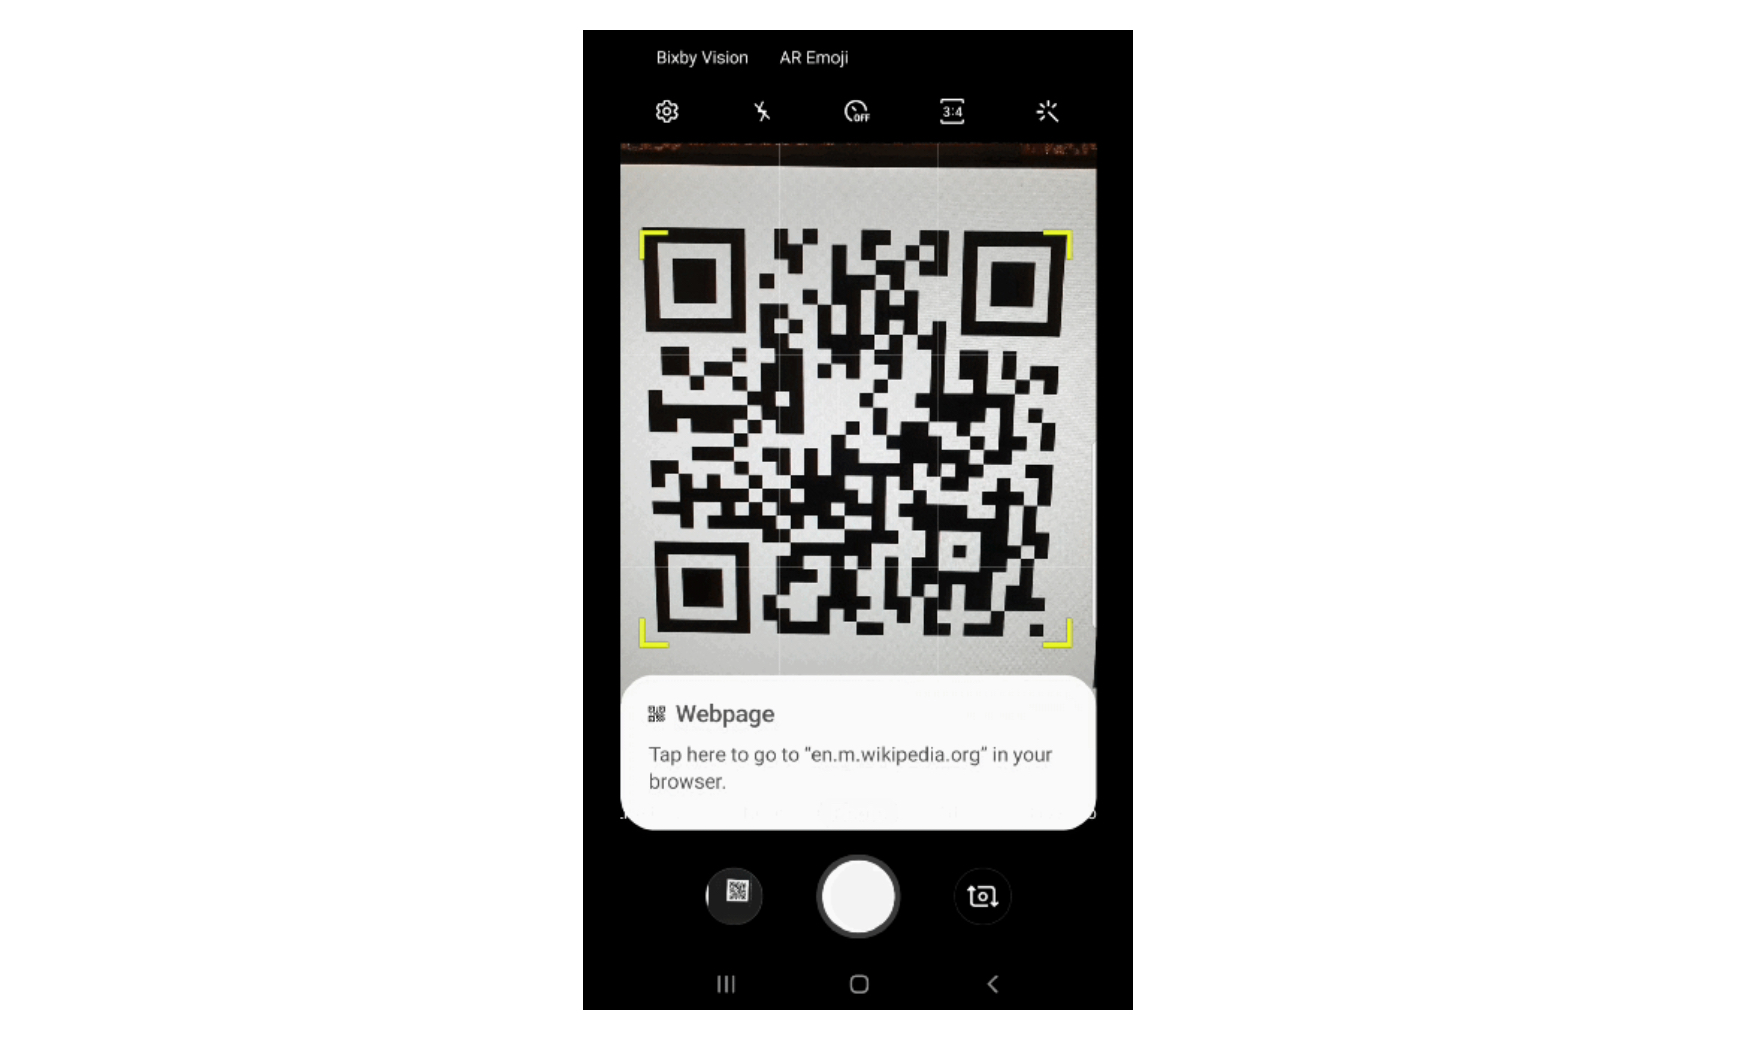 violence Fahrenheit employment Galaxy S9 June update also gets built-in QR code scanner - Android Community